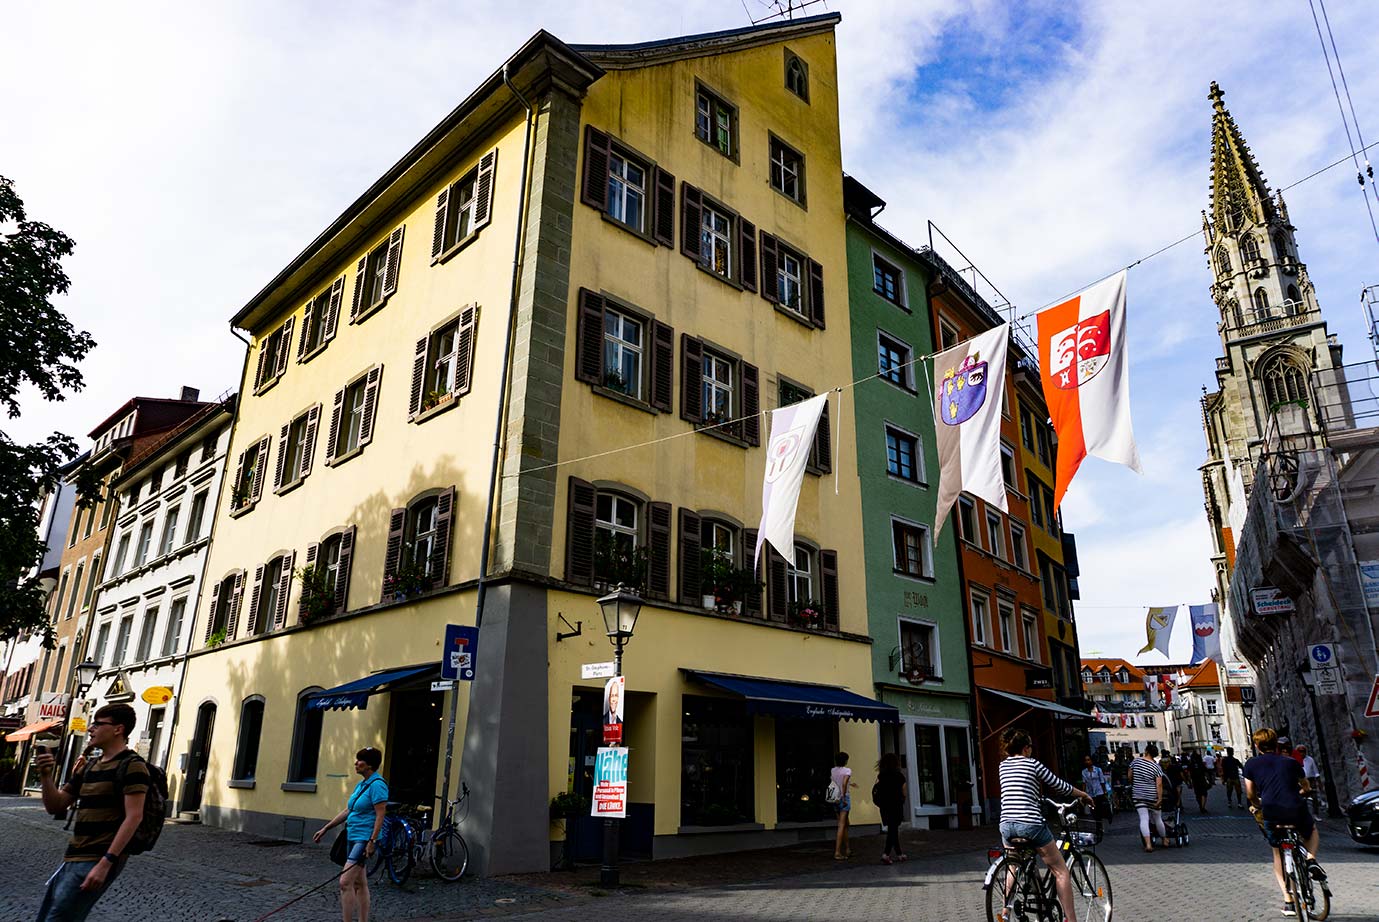 A street in Konstanz, Germany with medieval banners hanging and bicyclists below.